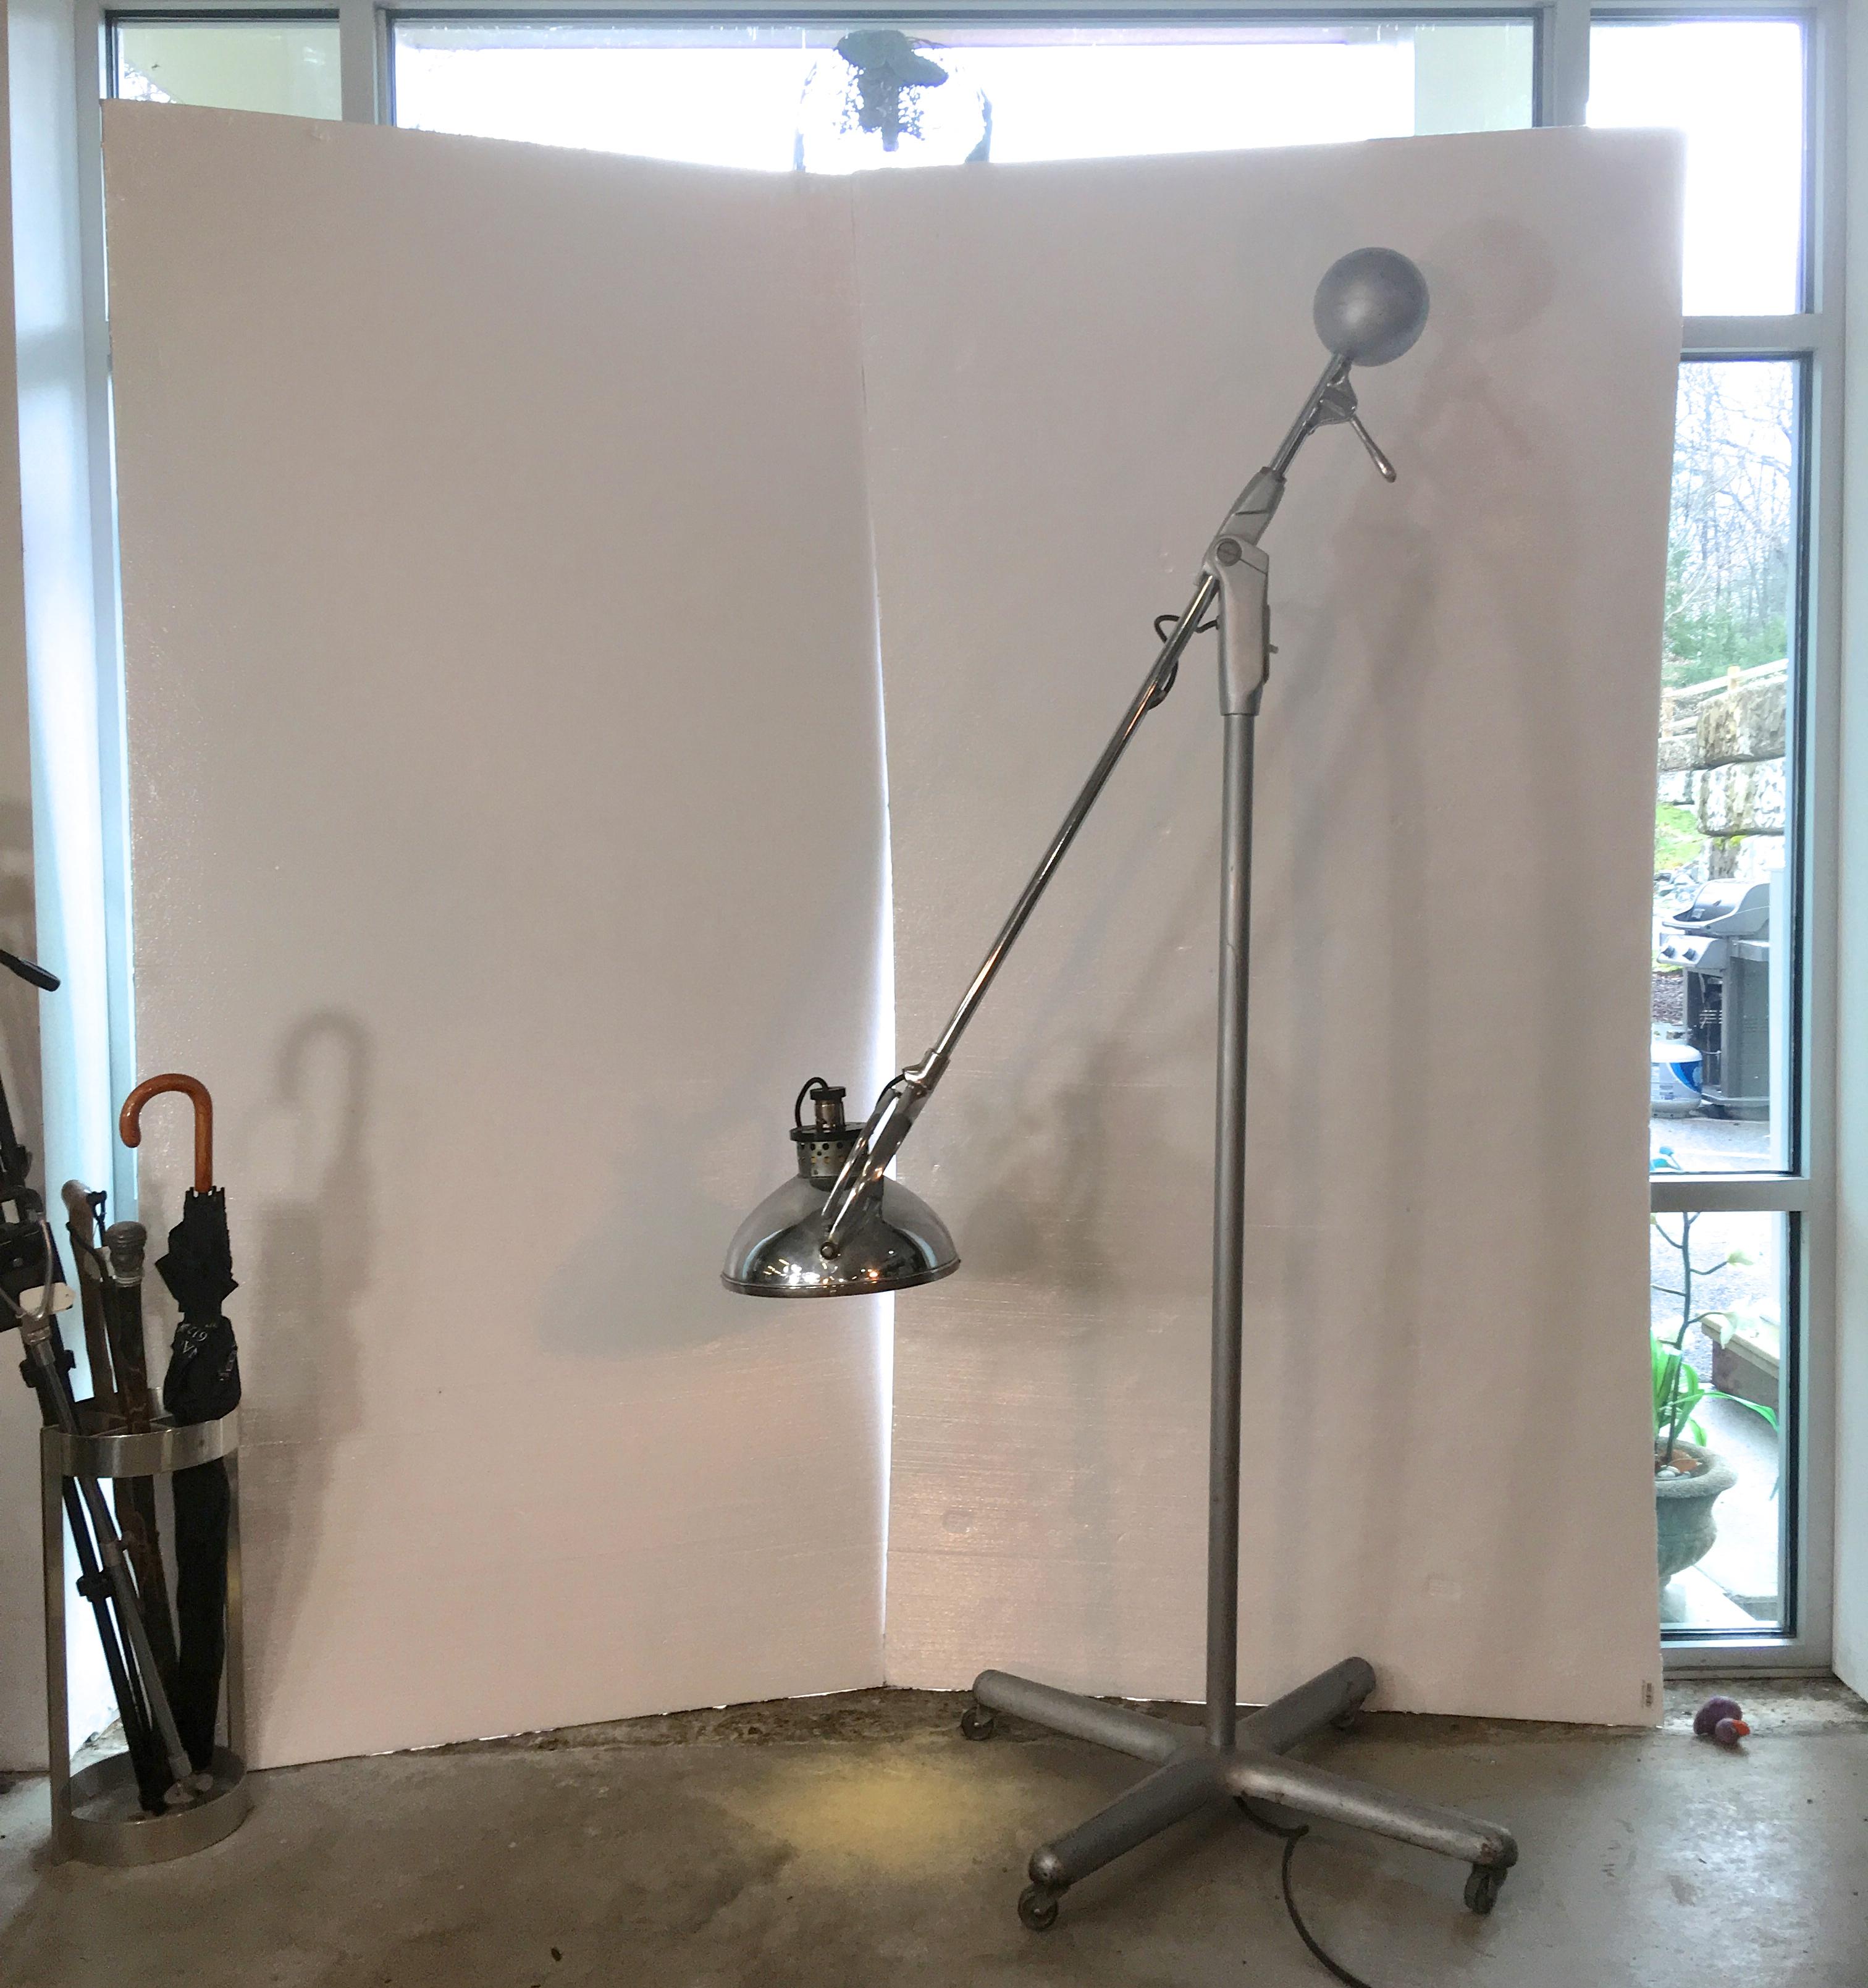 Inventor Ernest H. Greppin for Wilmot castle type 42 chrome and aluminum medical or surgical articulating counterbalance floor lamp on four star base with casters and original glass lens.